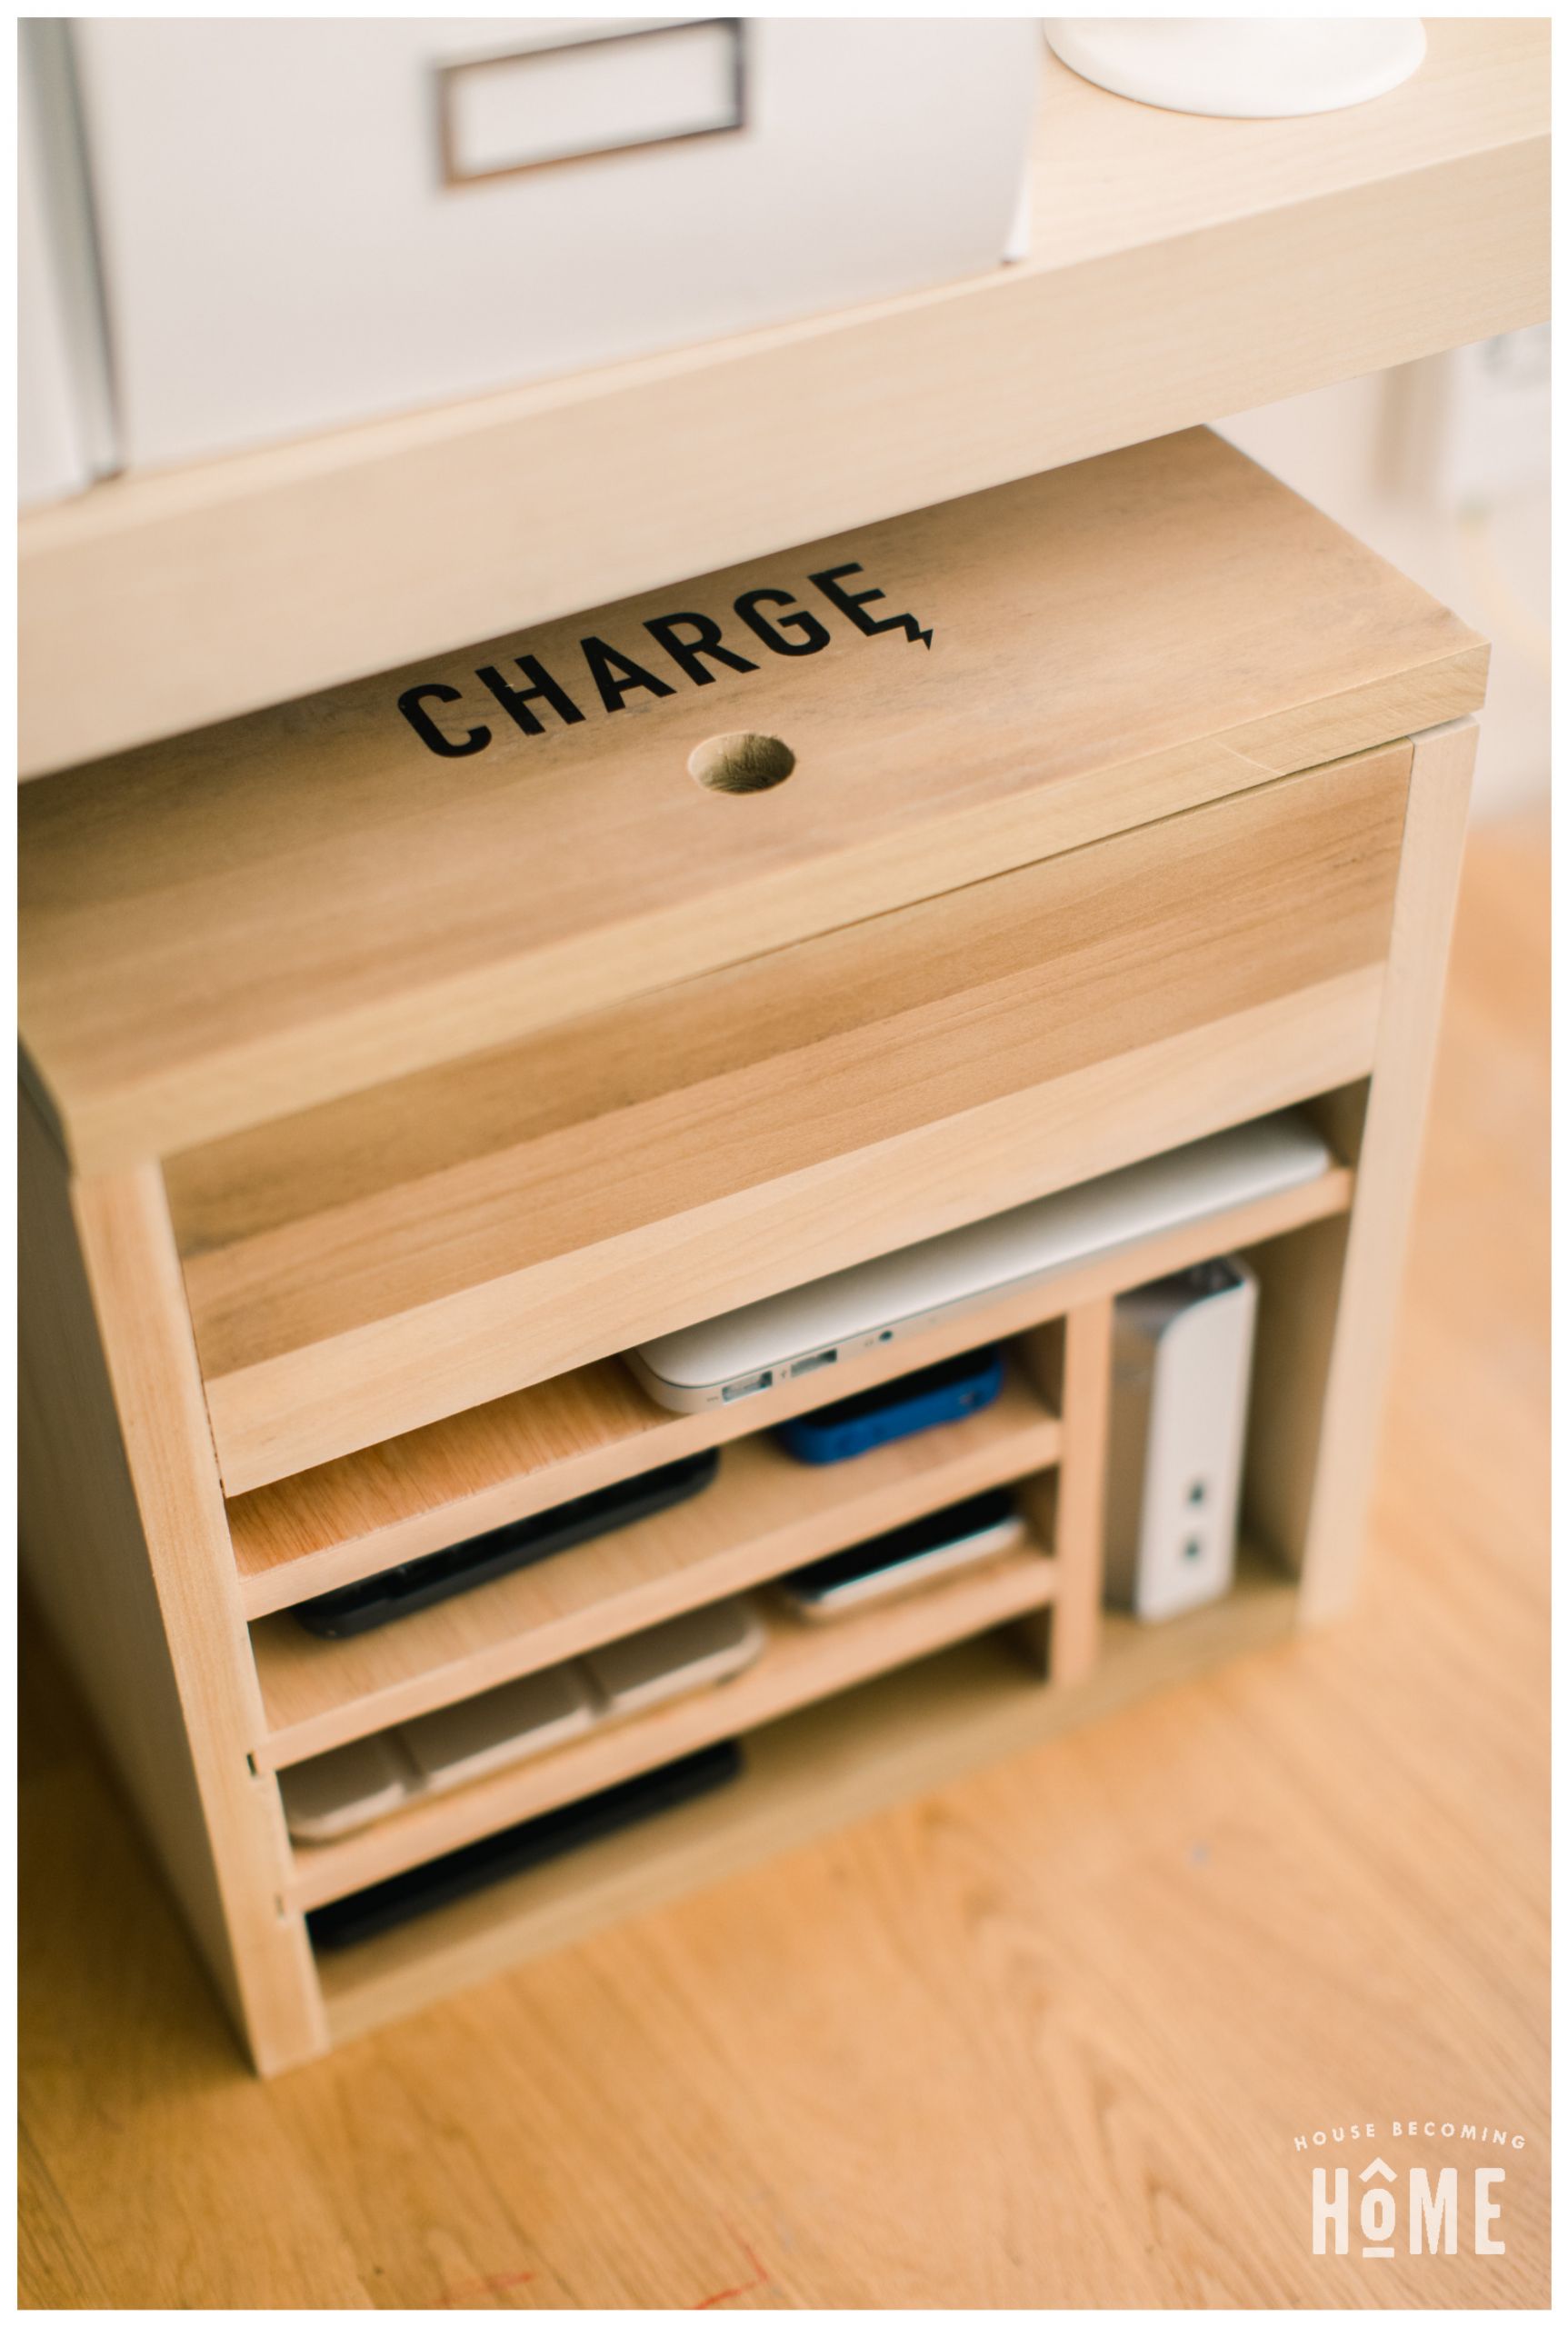 DIY Wood Charging Station
 How To Make A DIY Charging Station For Electronic Devices